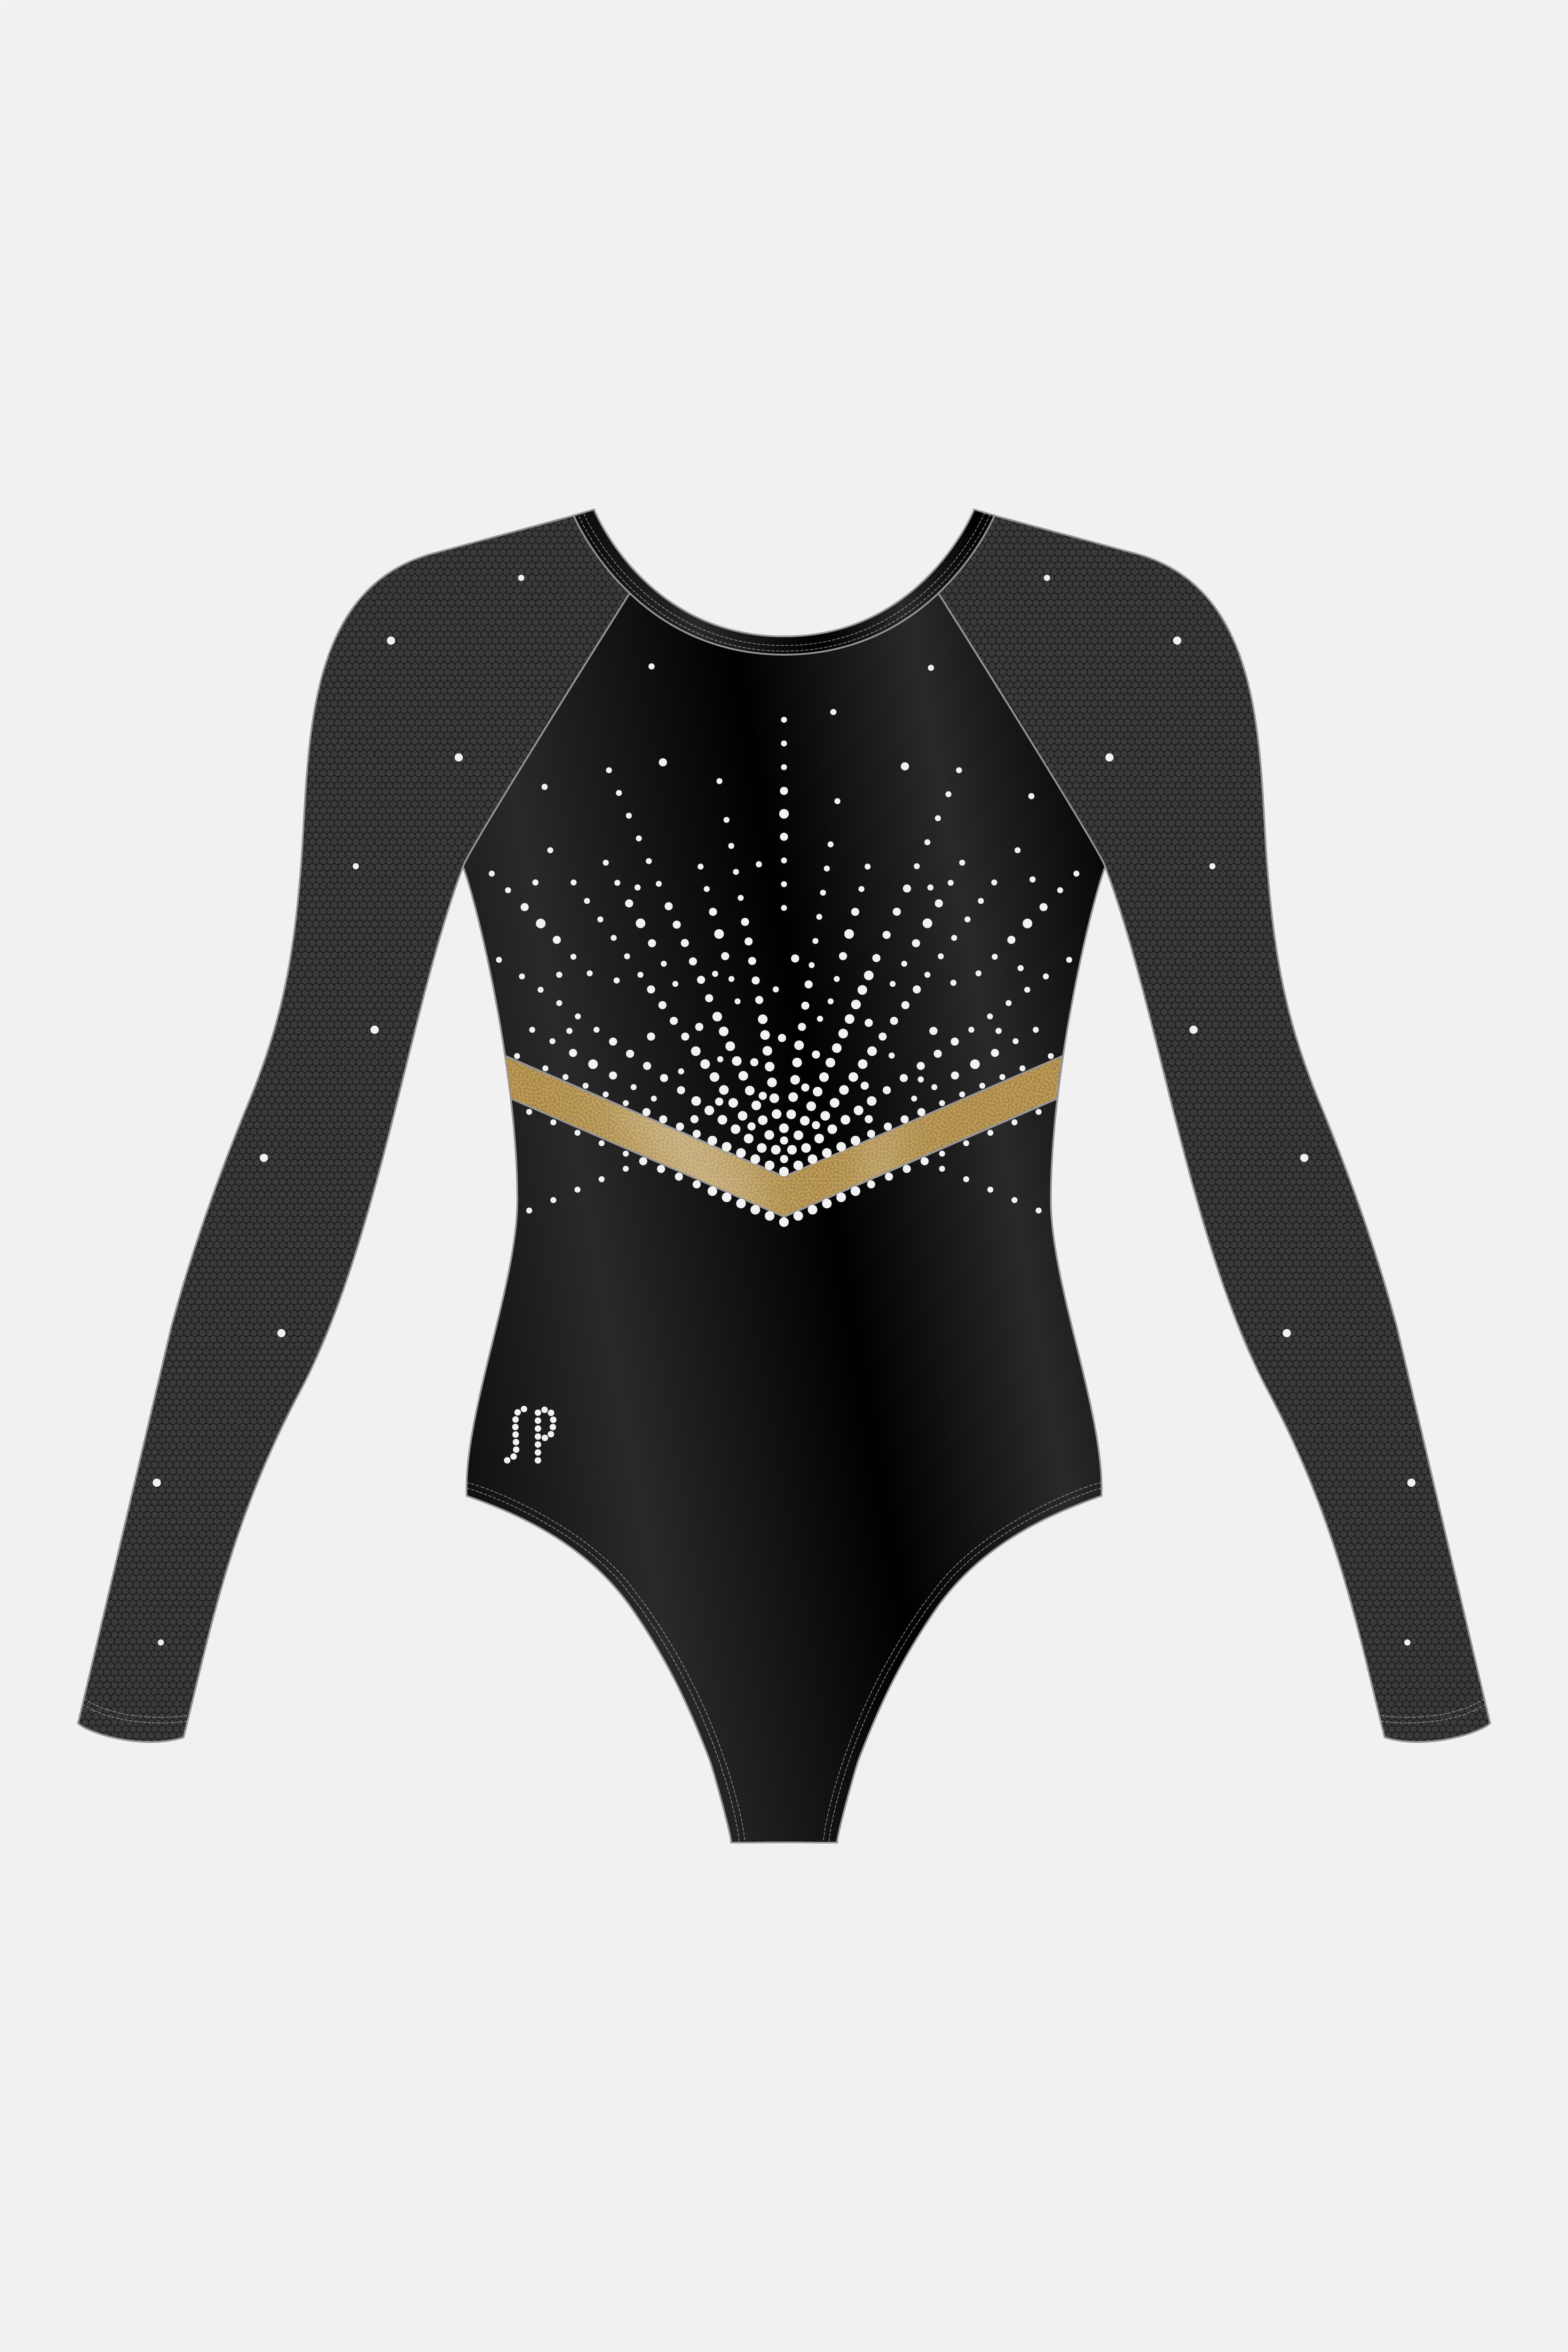 Womens Competition Leotard